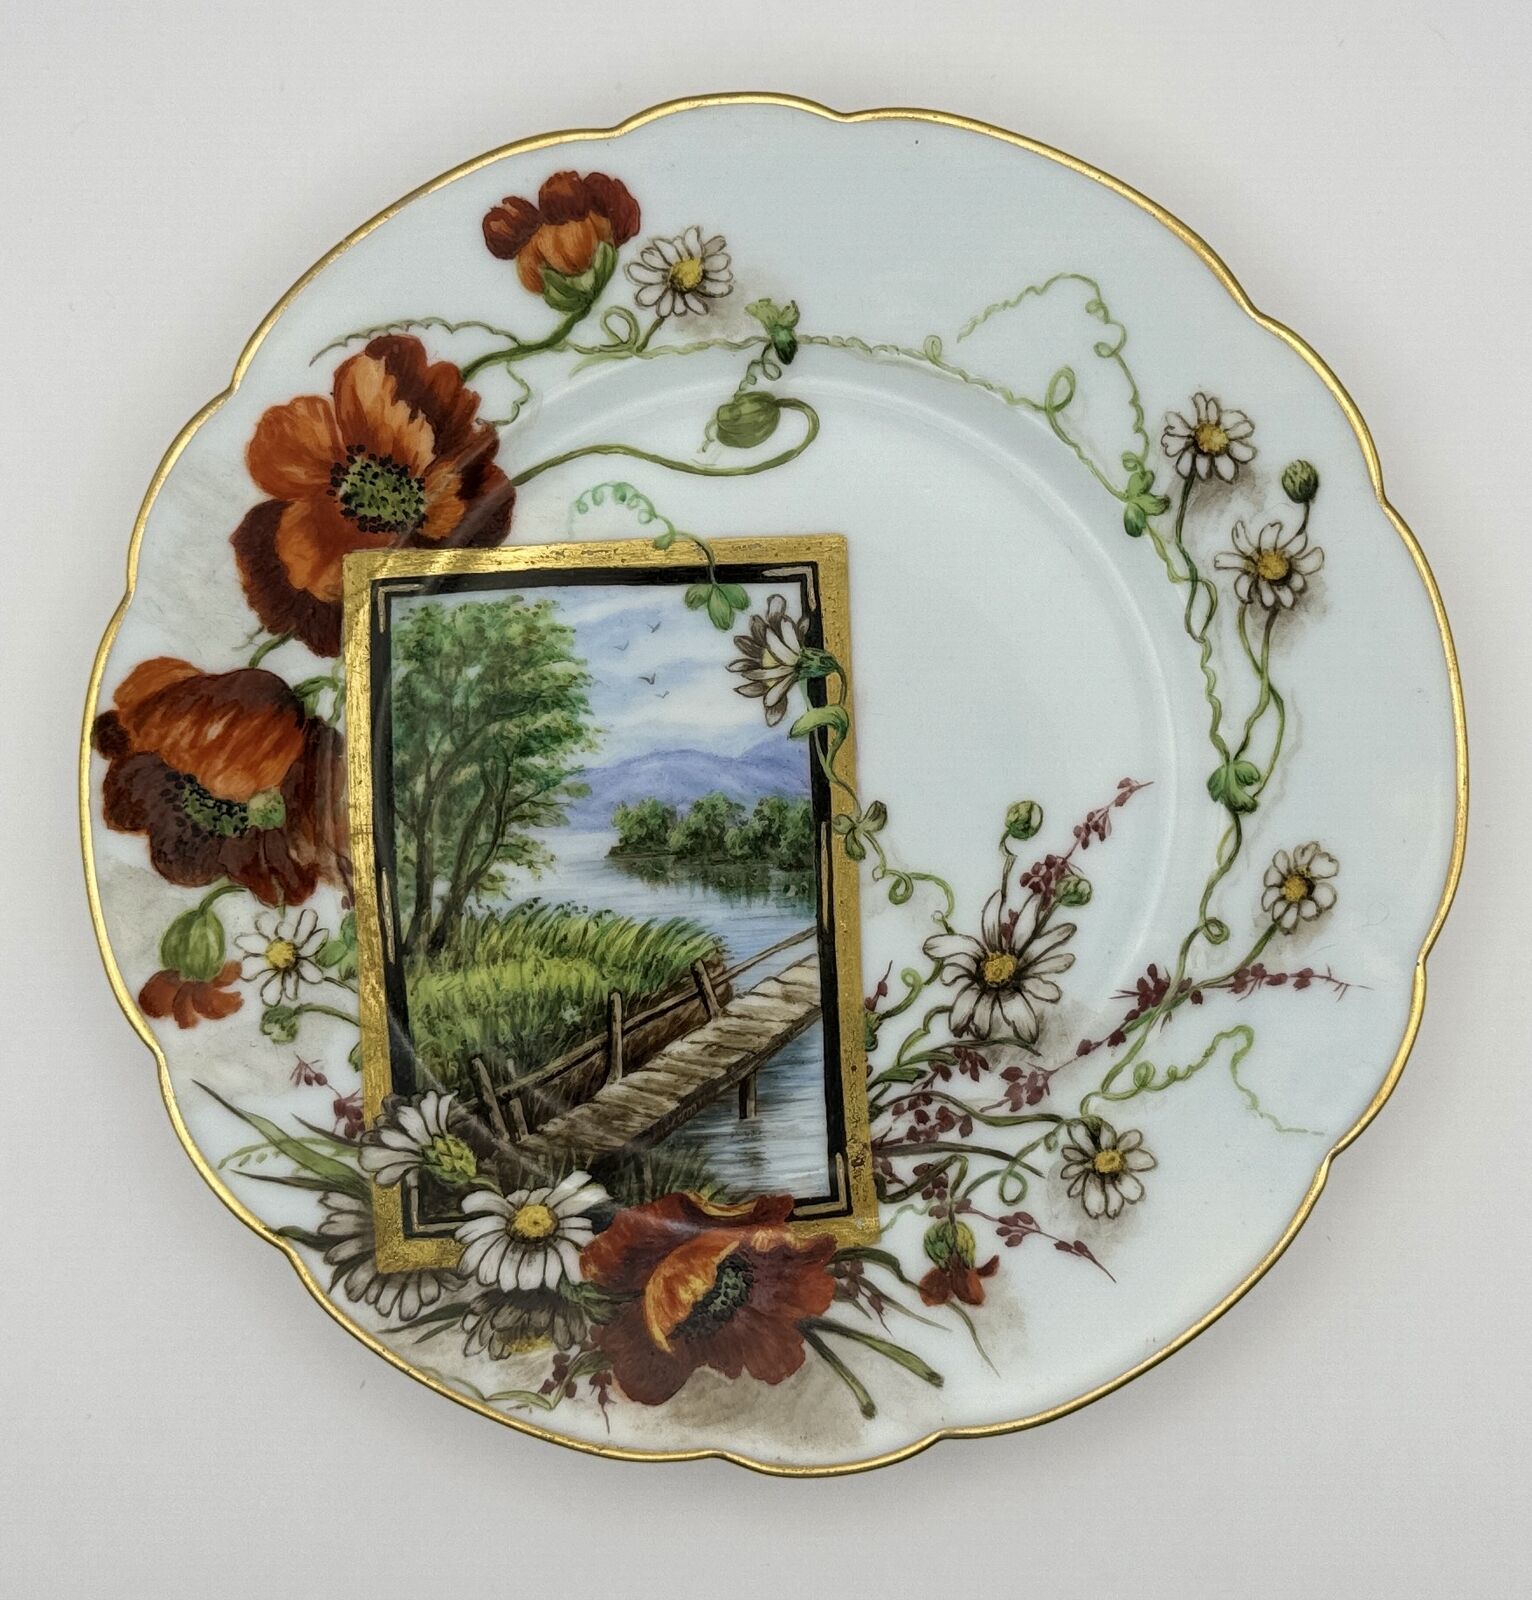 Rare Haviland & Co. 1881 Limoges Hand-Painted Scenic Floral Signed Plate